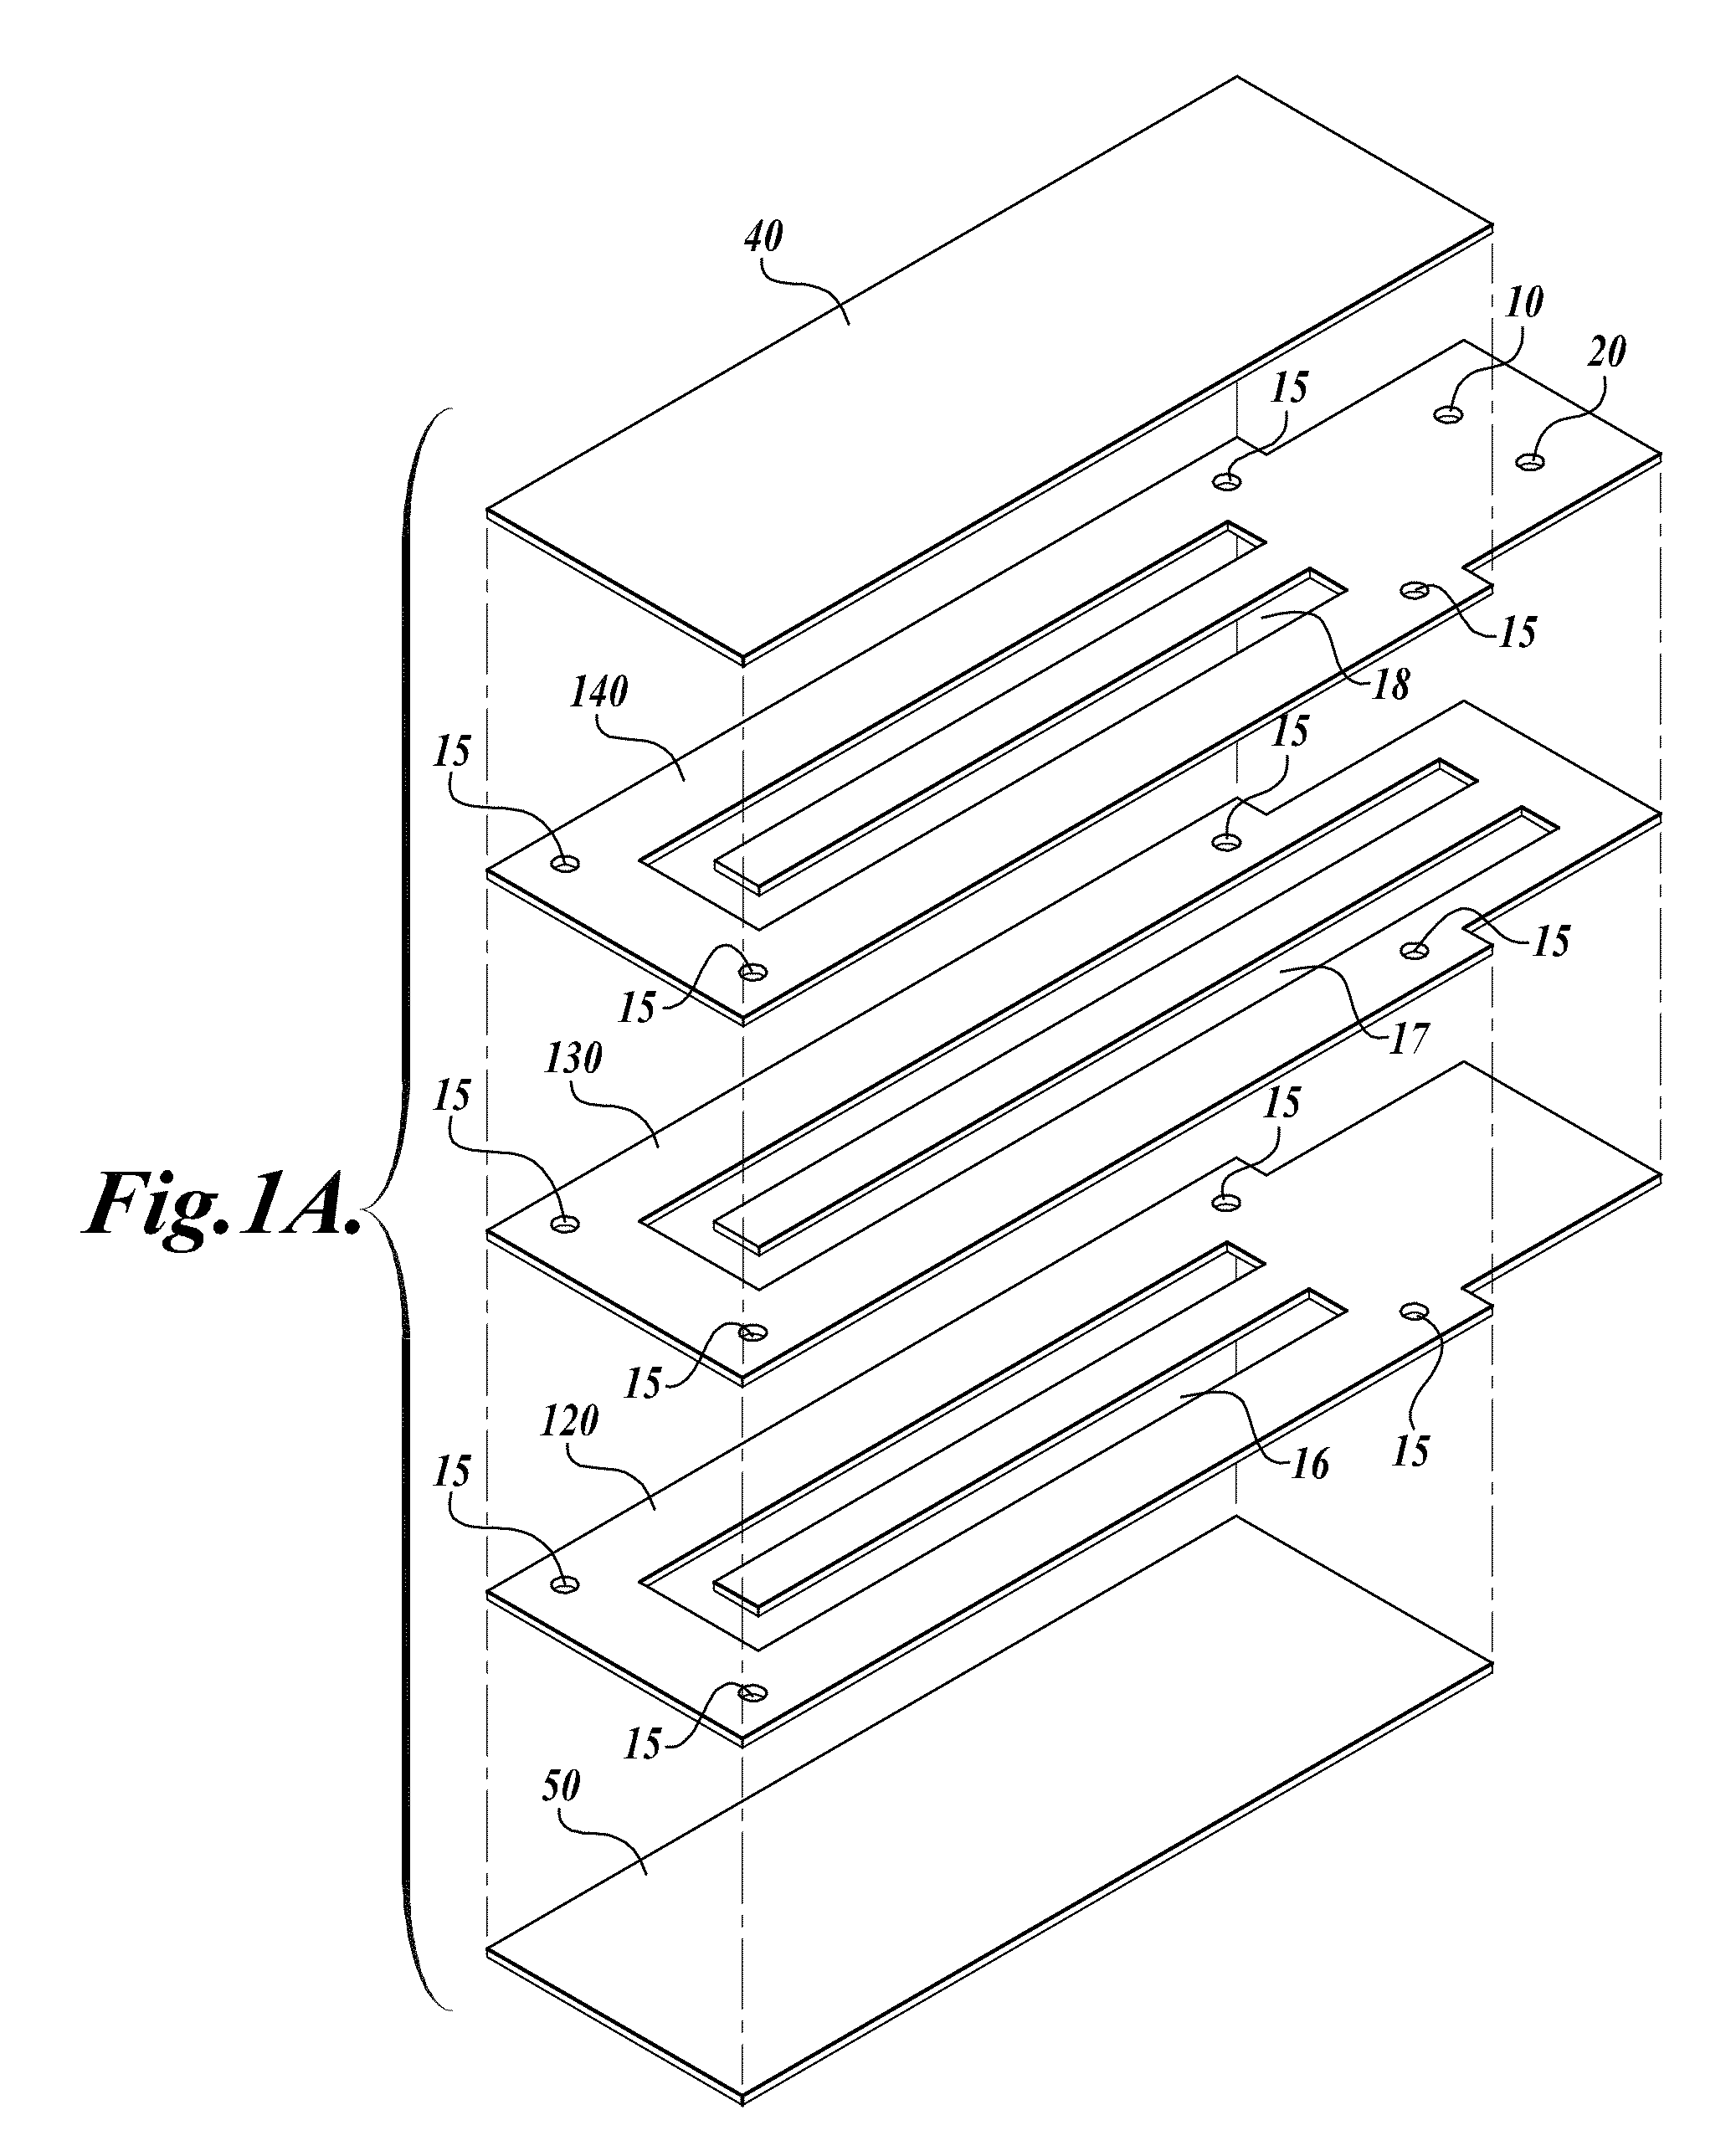 Devices and processes for nucleic acid extraction